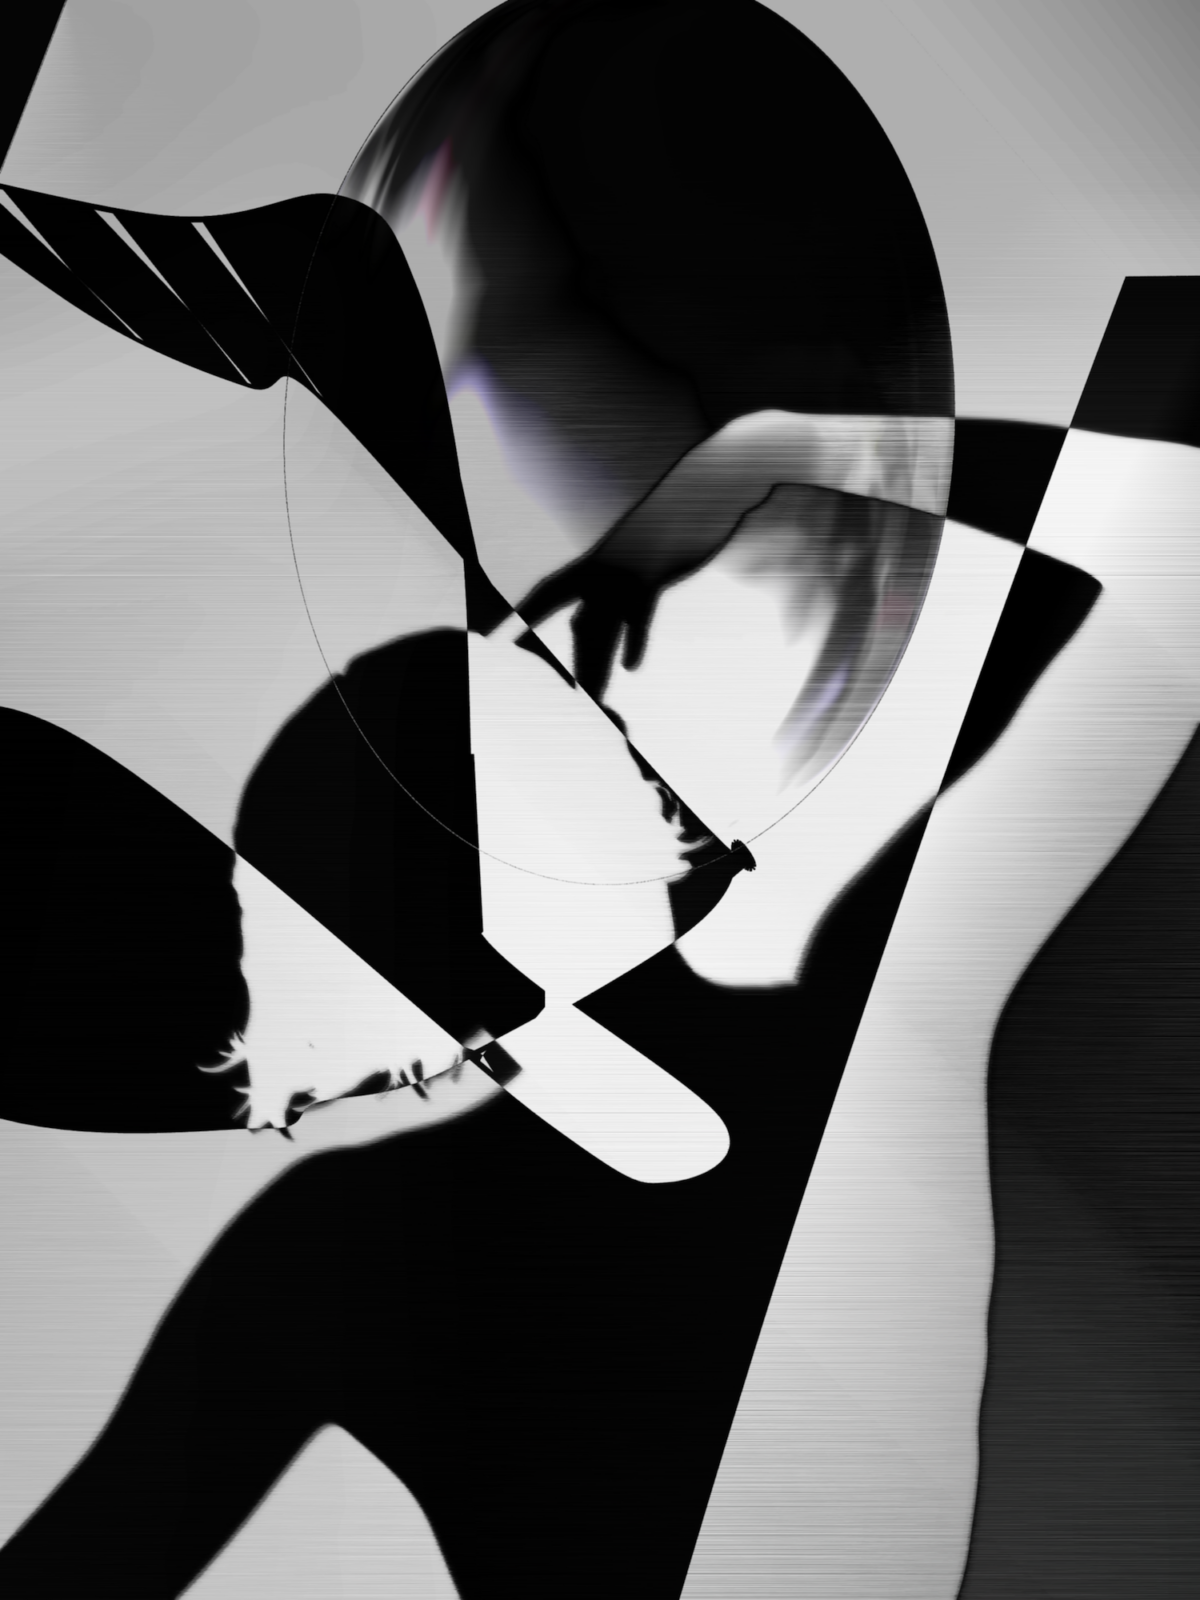 A black and white silhouette portrait or a woman dancing with abstract lines and circles across the top of the image.